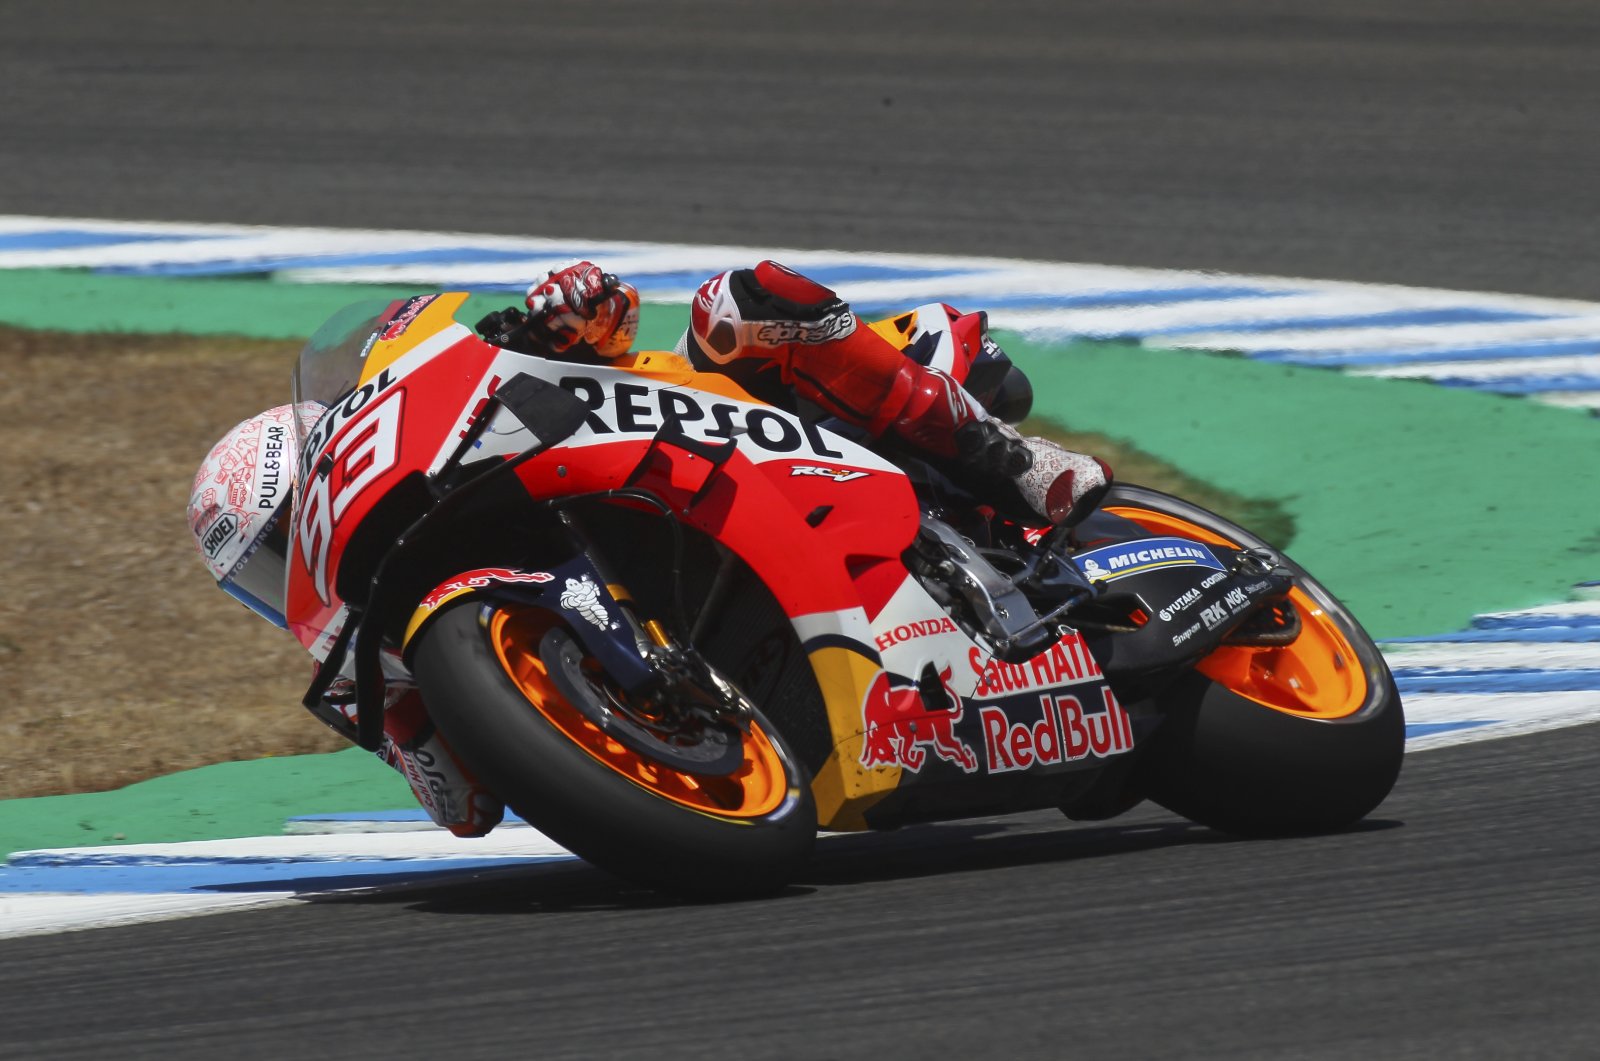 Marc Marquez steers his motorcycle during the Spanish Motorcycle Grand Prix in Jerez de la Frontera, July 19, 2020. (AP Photo)